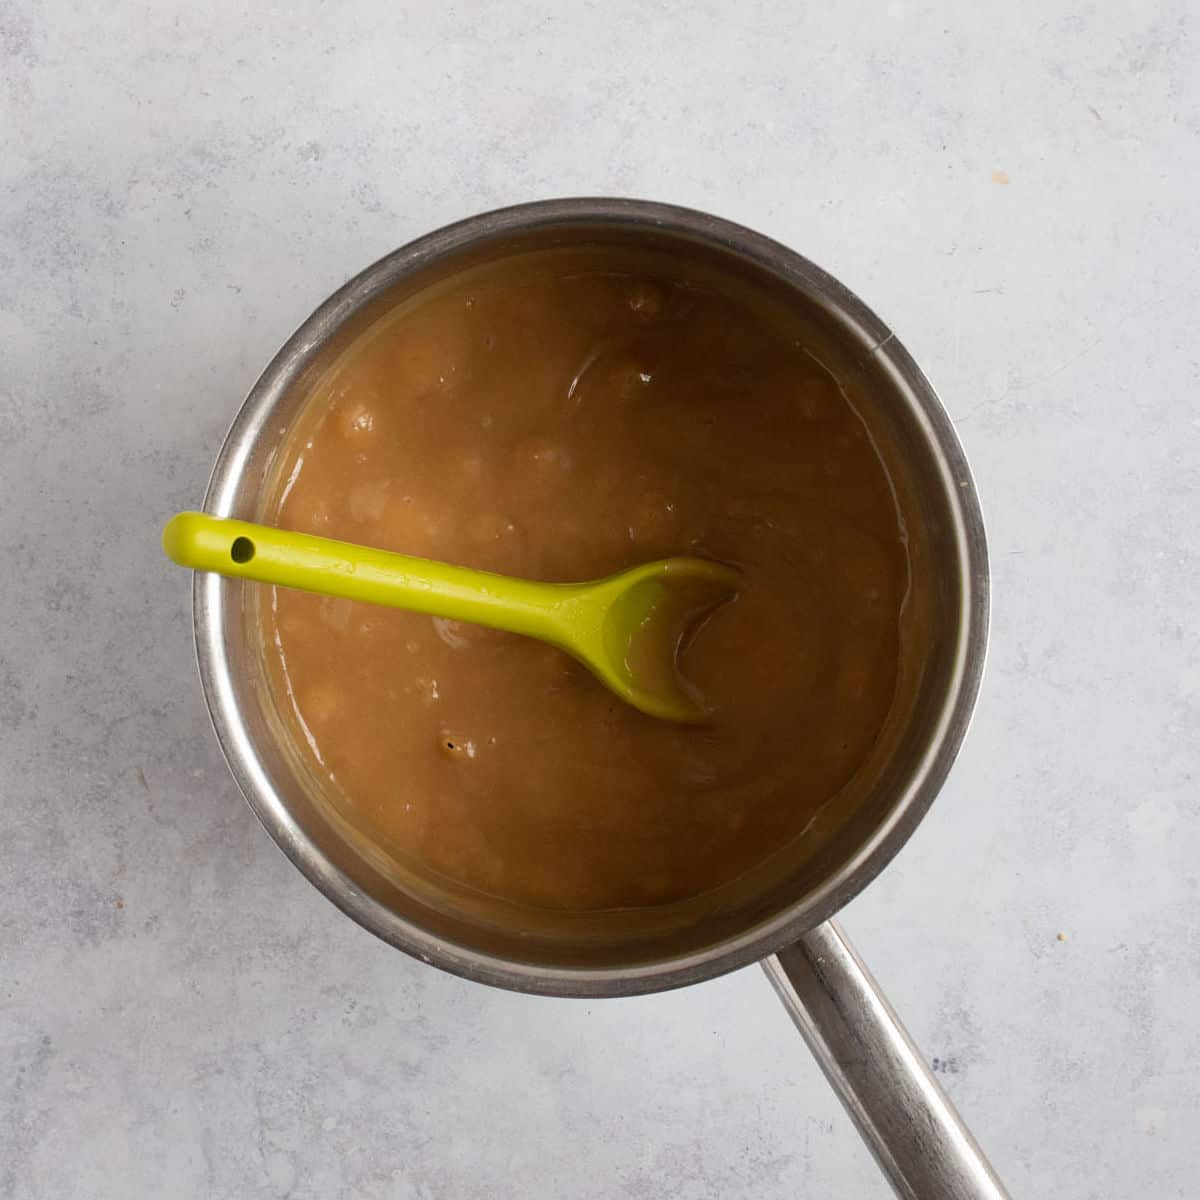 Finished caramel in a saucepan.